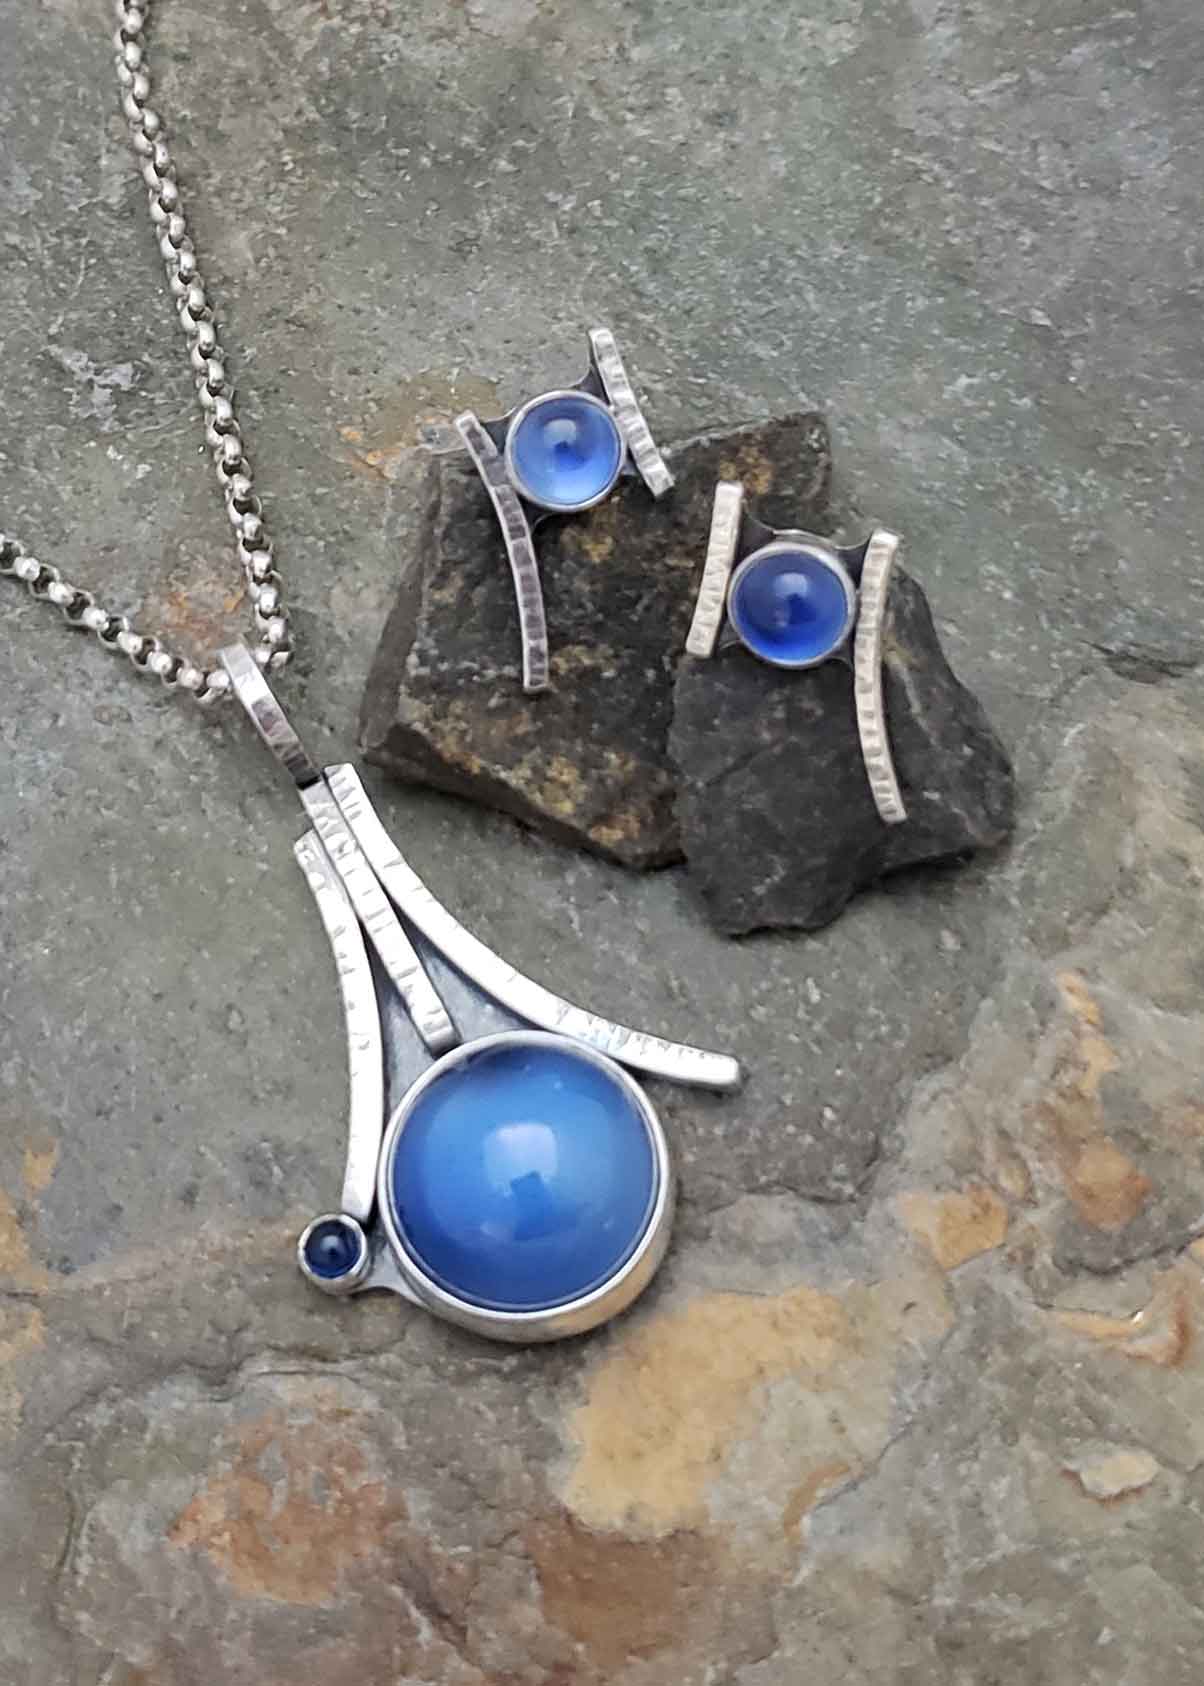 Glow - blue sapphires set over mother of pearl earrings and pendant